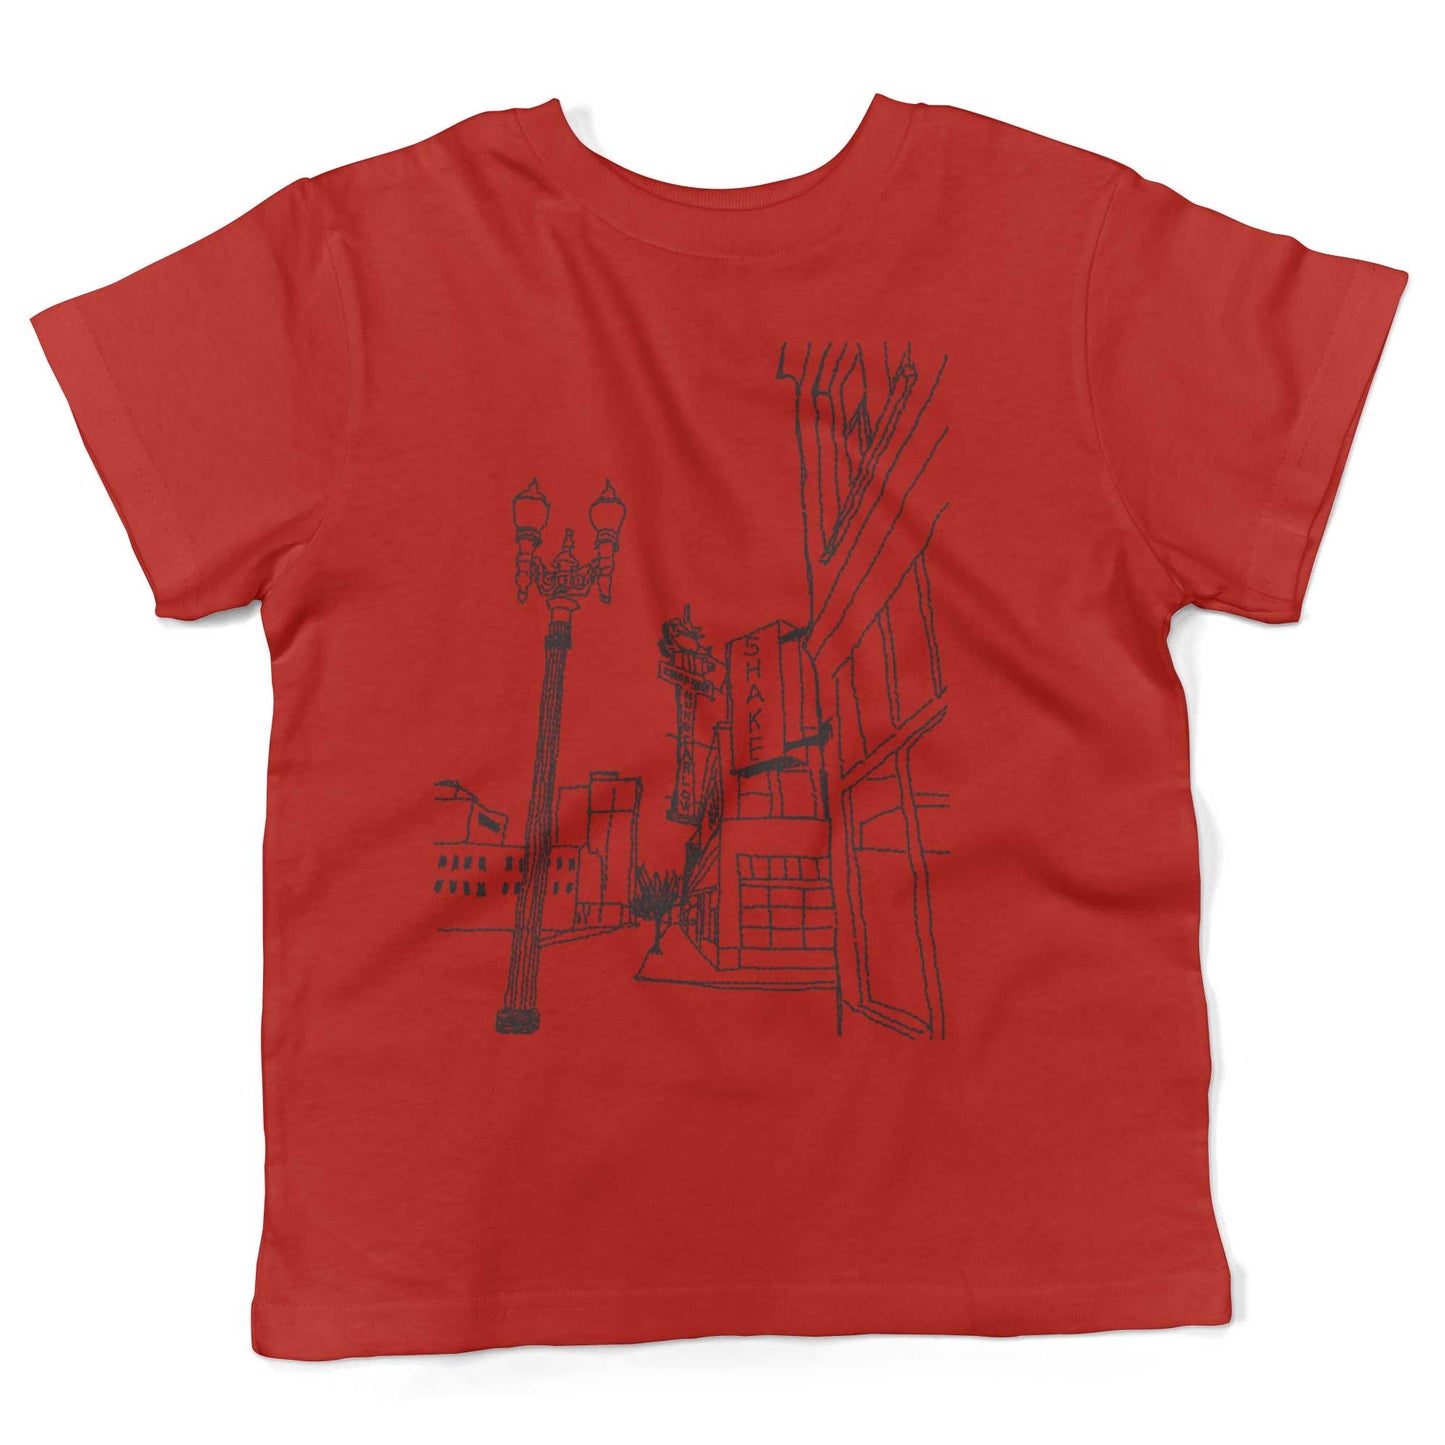 Chinatown Hung Far Low Restaurant Toddler Shirt-Red-2T